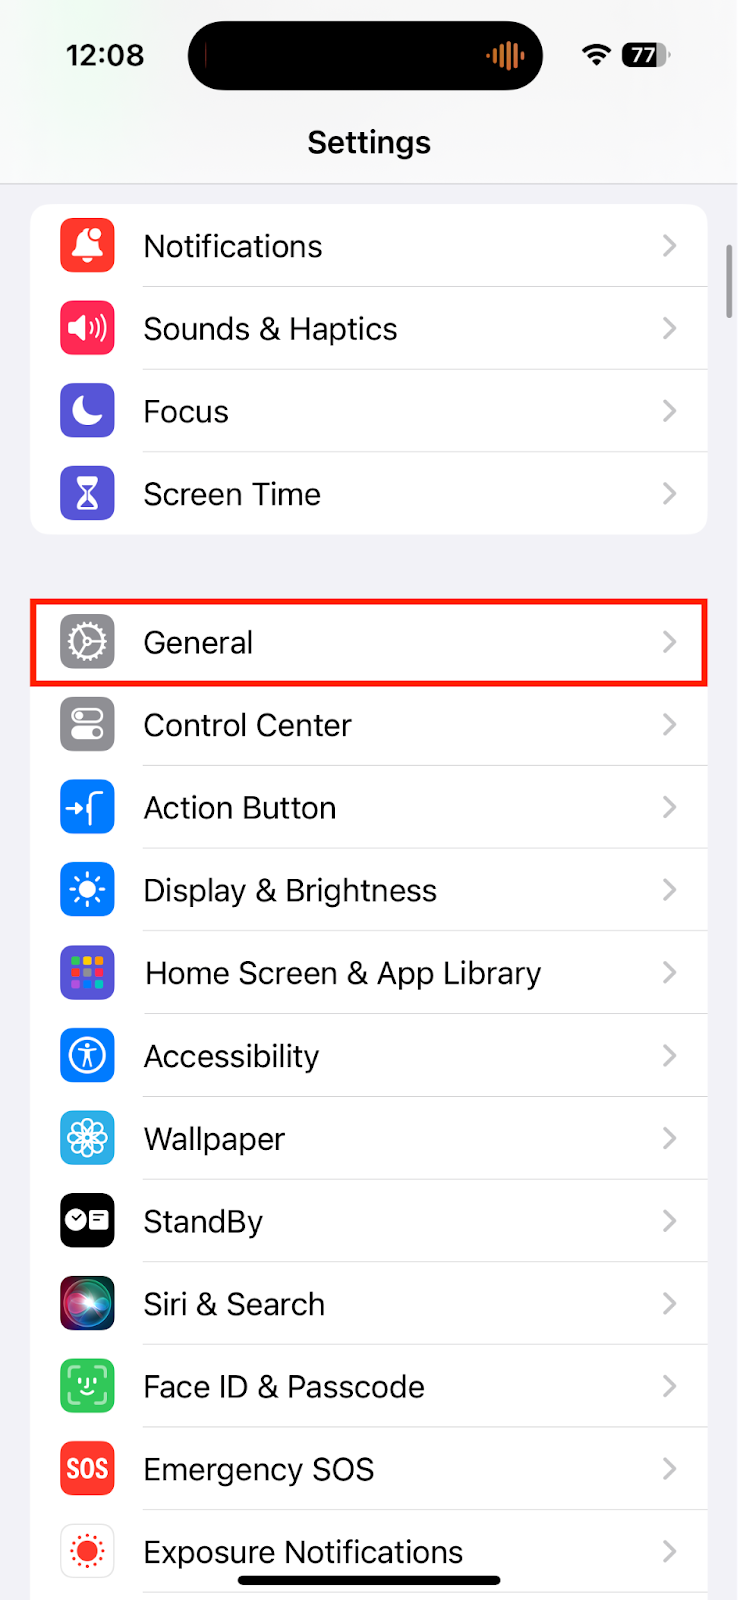 The Settings app on iPhone displaying a list of system options. Select General to factory reset your device.